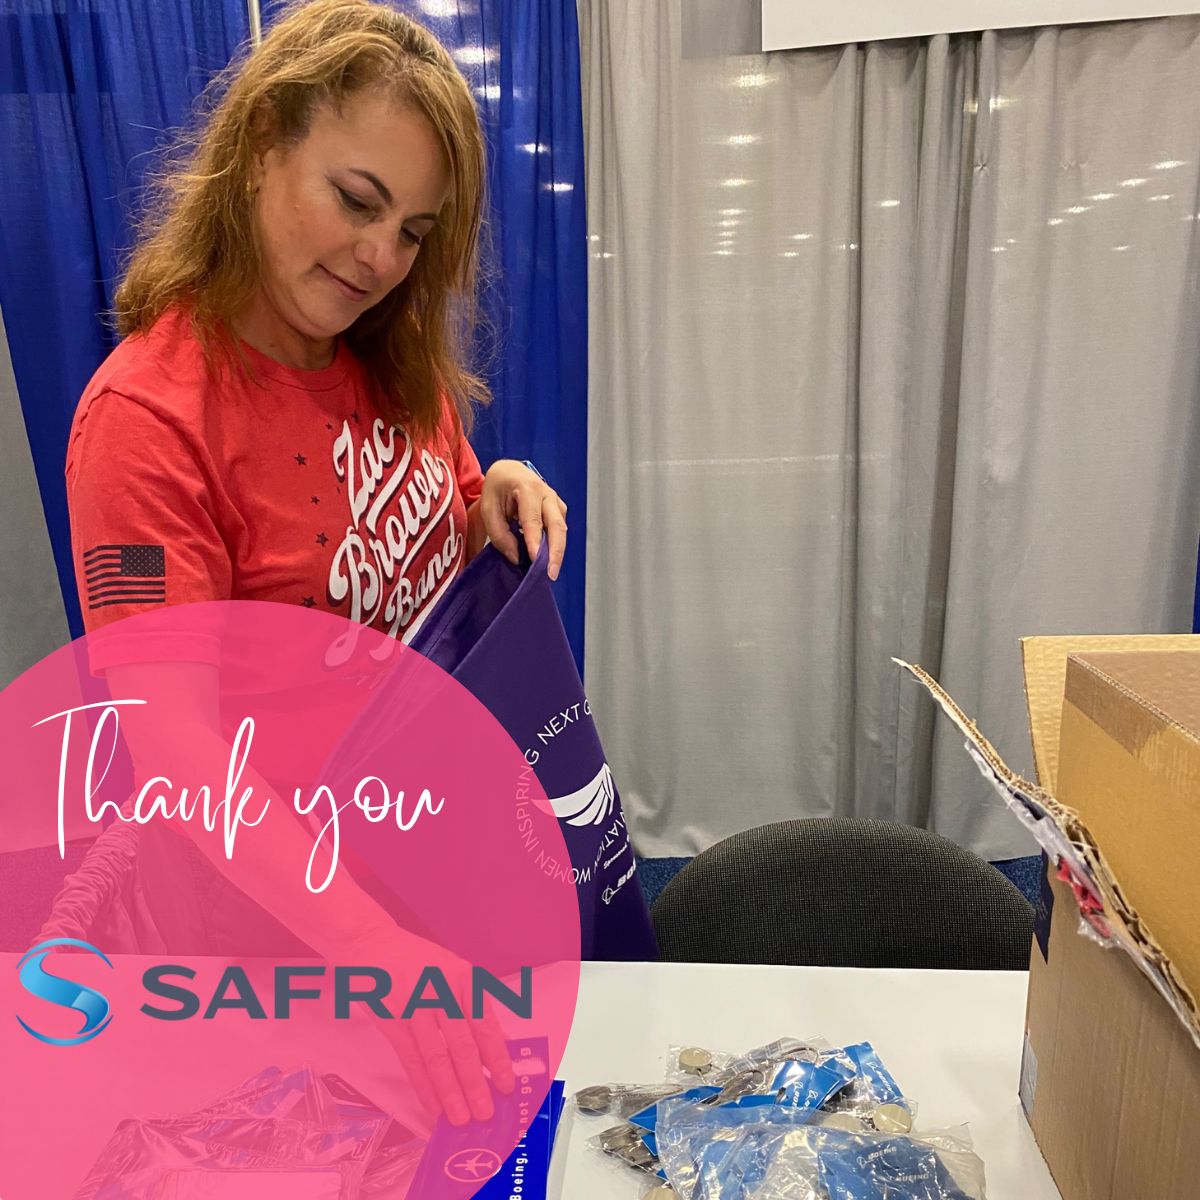 Thank you @SAFRAN  for being a #RUBY sponsor for our #501c3nonprofit as we work to make our 3rd annual #jobfAIR at #MROAM another huge success!

#Aviation #WomenInAviation #25by25 #DEI